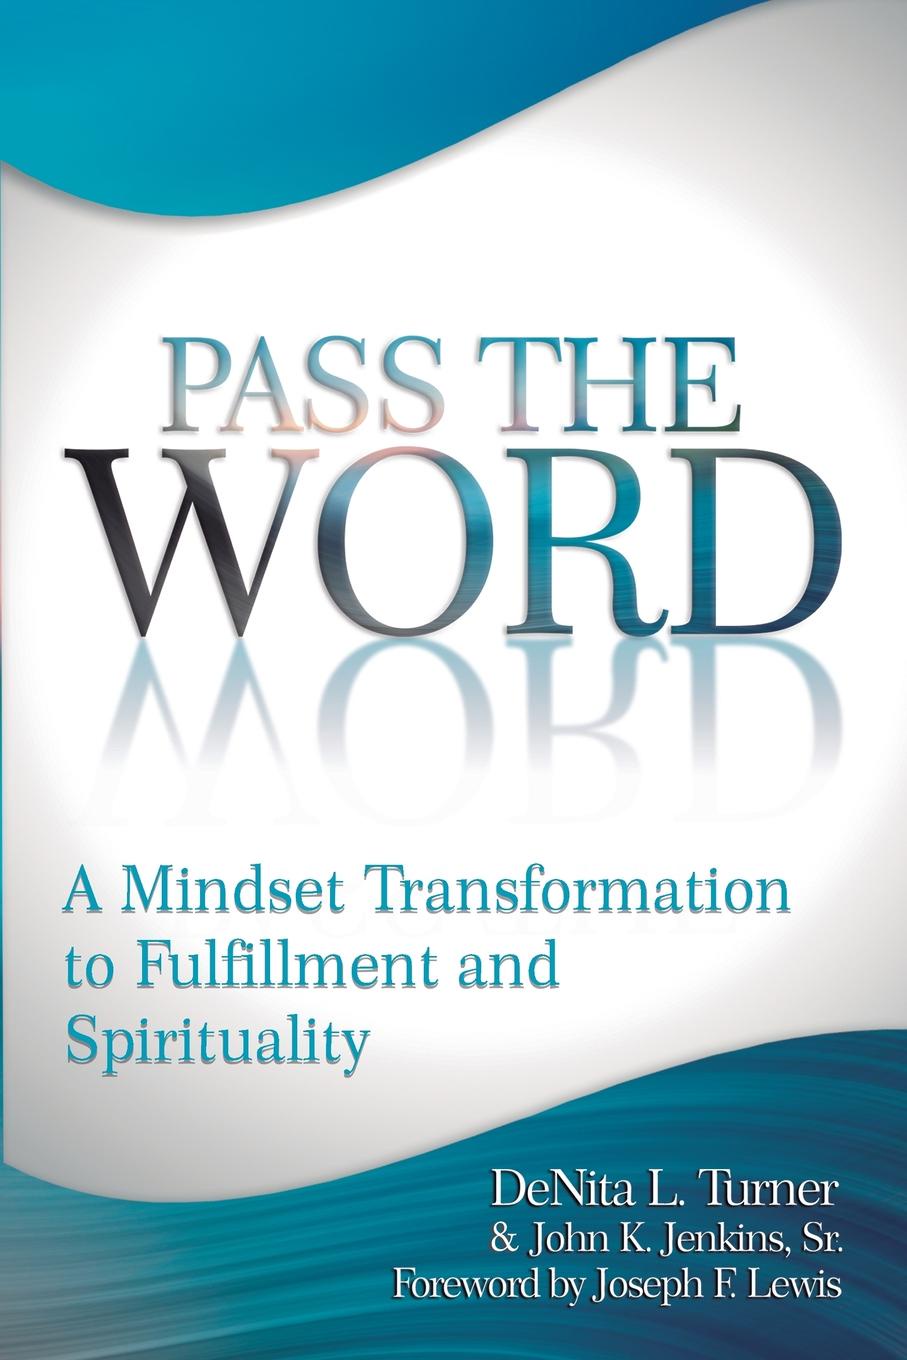 Pass the Word. A Mindset Transformation to Fulfillment and Spirituality